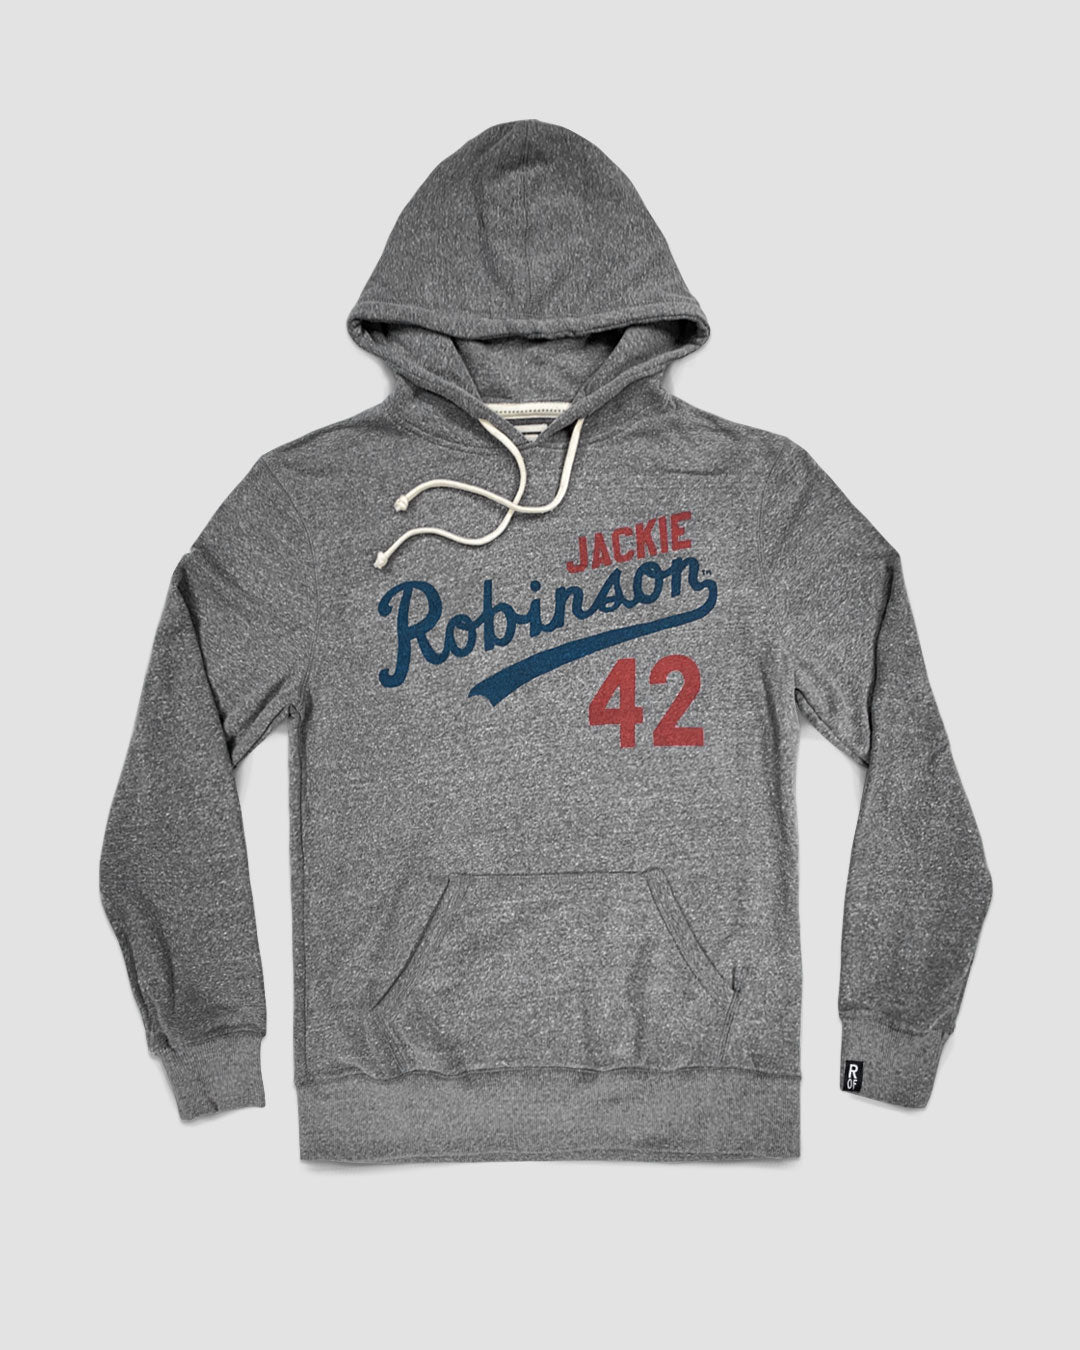 Jackie Robinson #42 Classic Grey PO Hoody - Roots of Fight